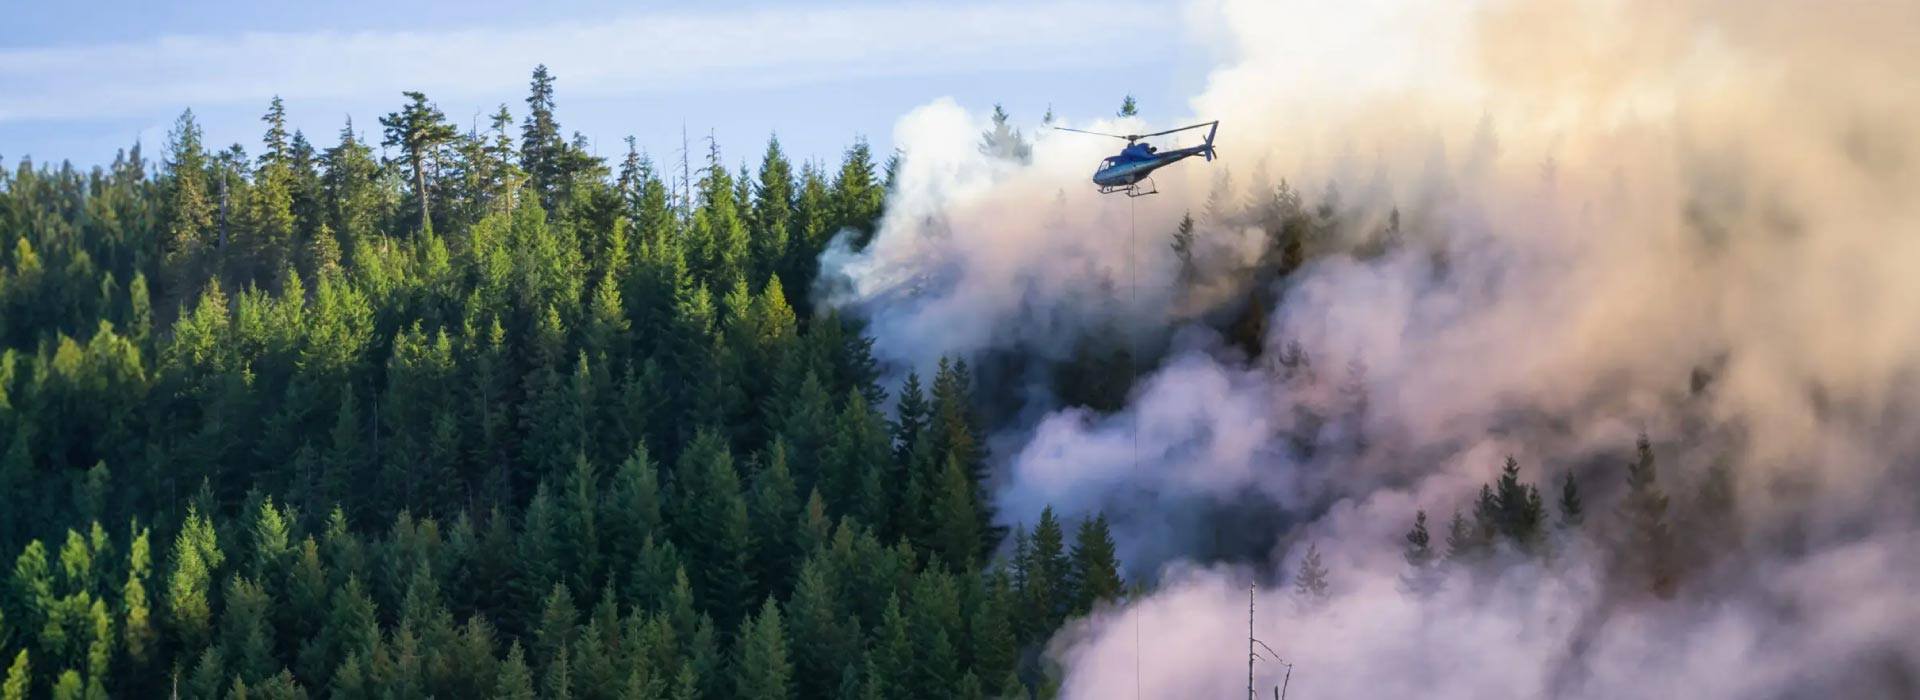 Helicopter fighting British Columbia wildfires on a hot sunny summer day.